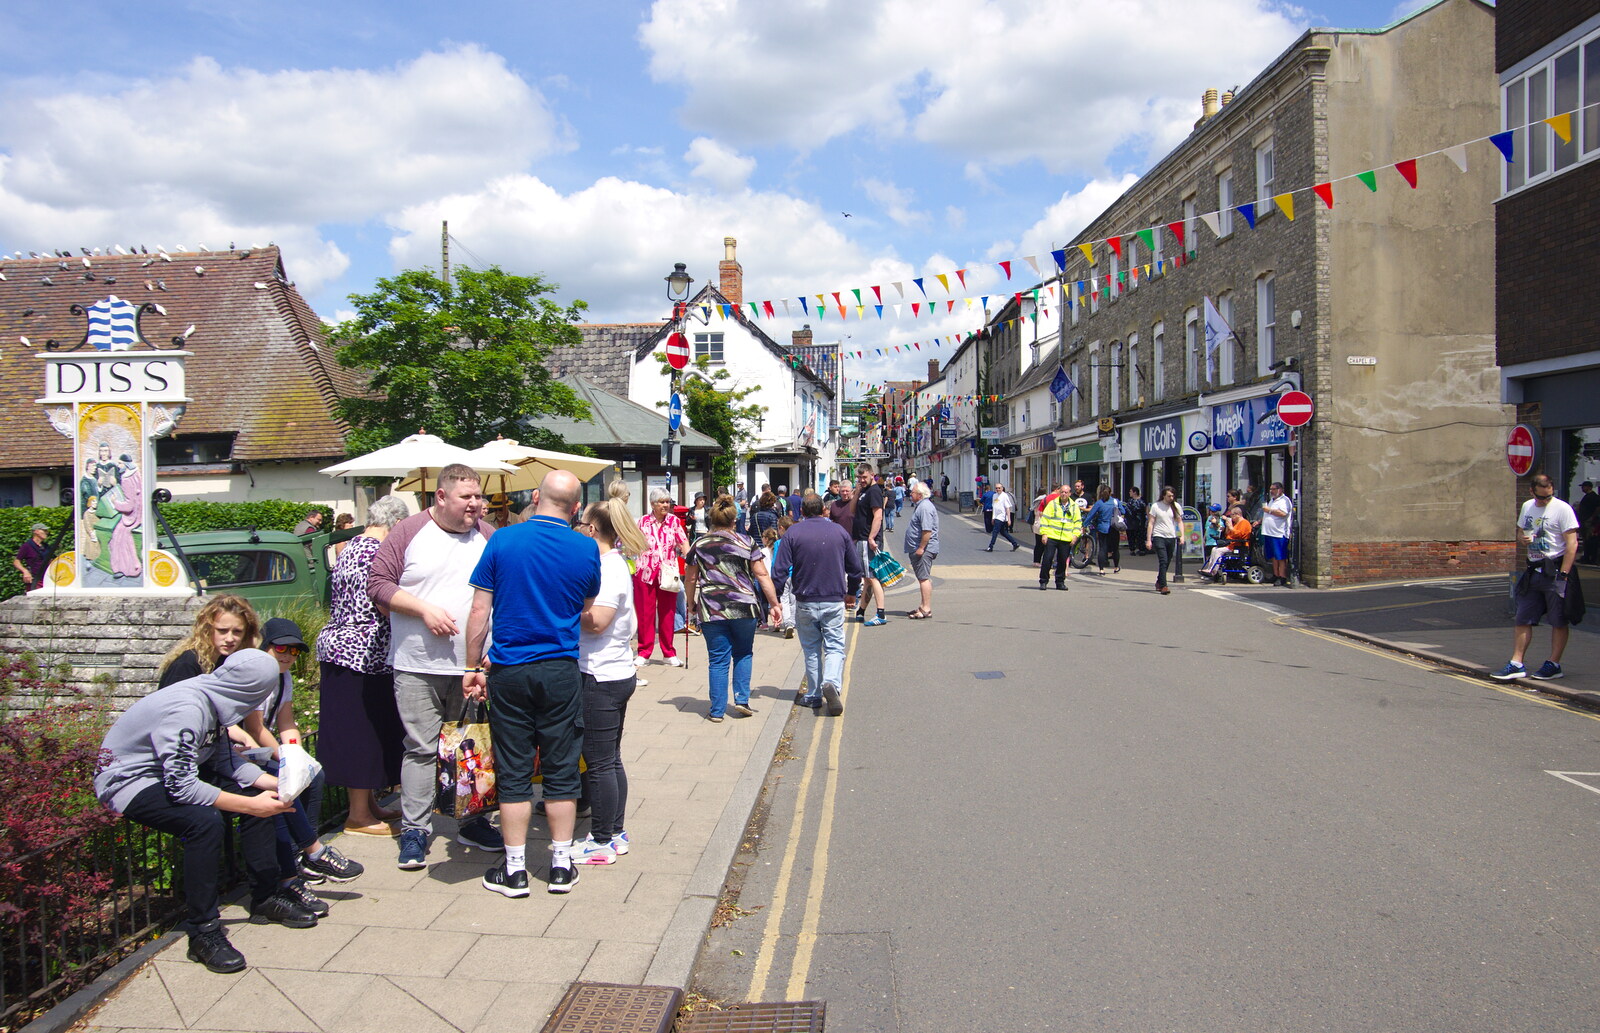 People mill around by the town sign from The Diss Carnival 2019, Diss, Norfolk - 9th June 2019